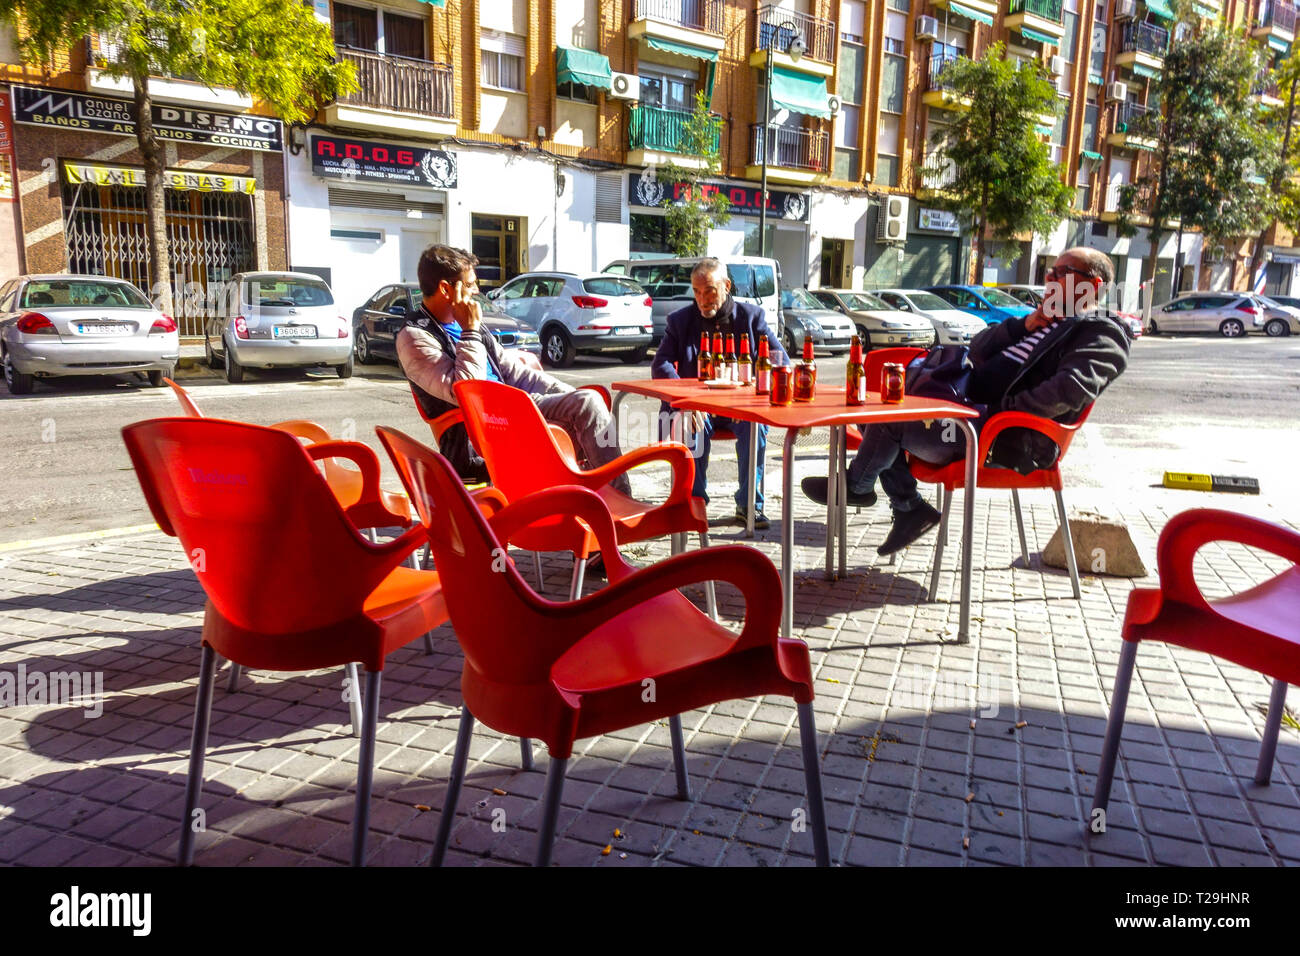 Three men sit outside the bar and drink bottled beer, Valencia Street bar Quart de Poblet Valencia district, Spain Stock Photo